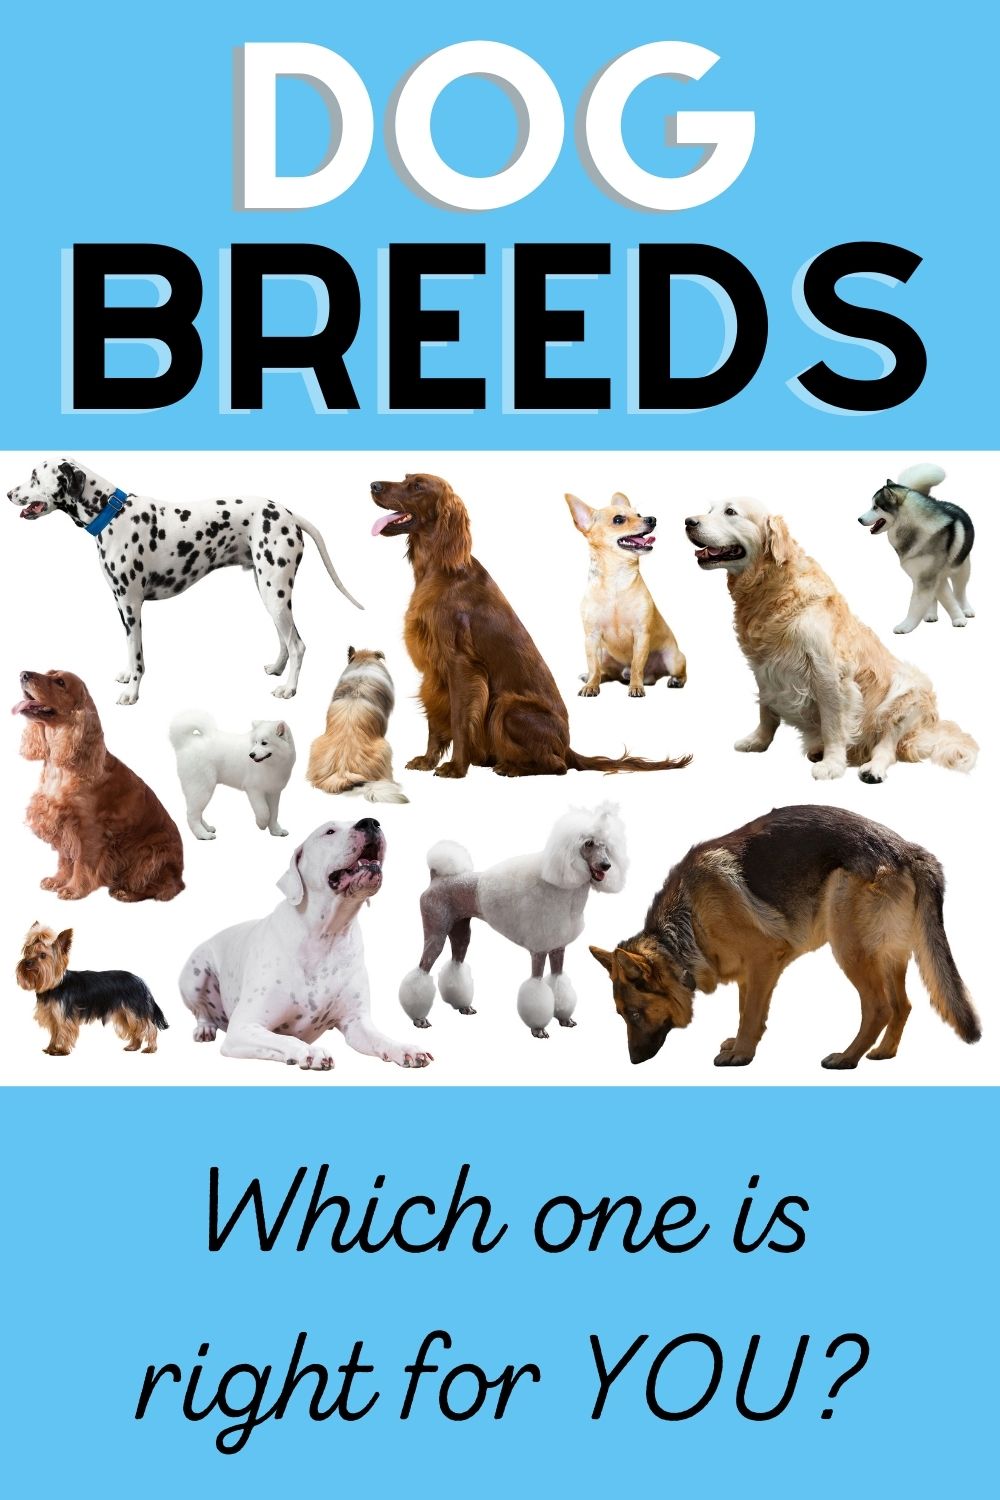 how can you tell a dogs breed